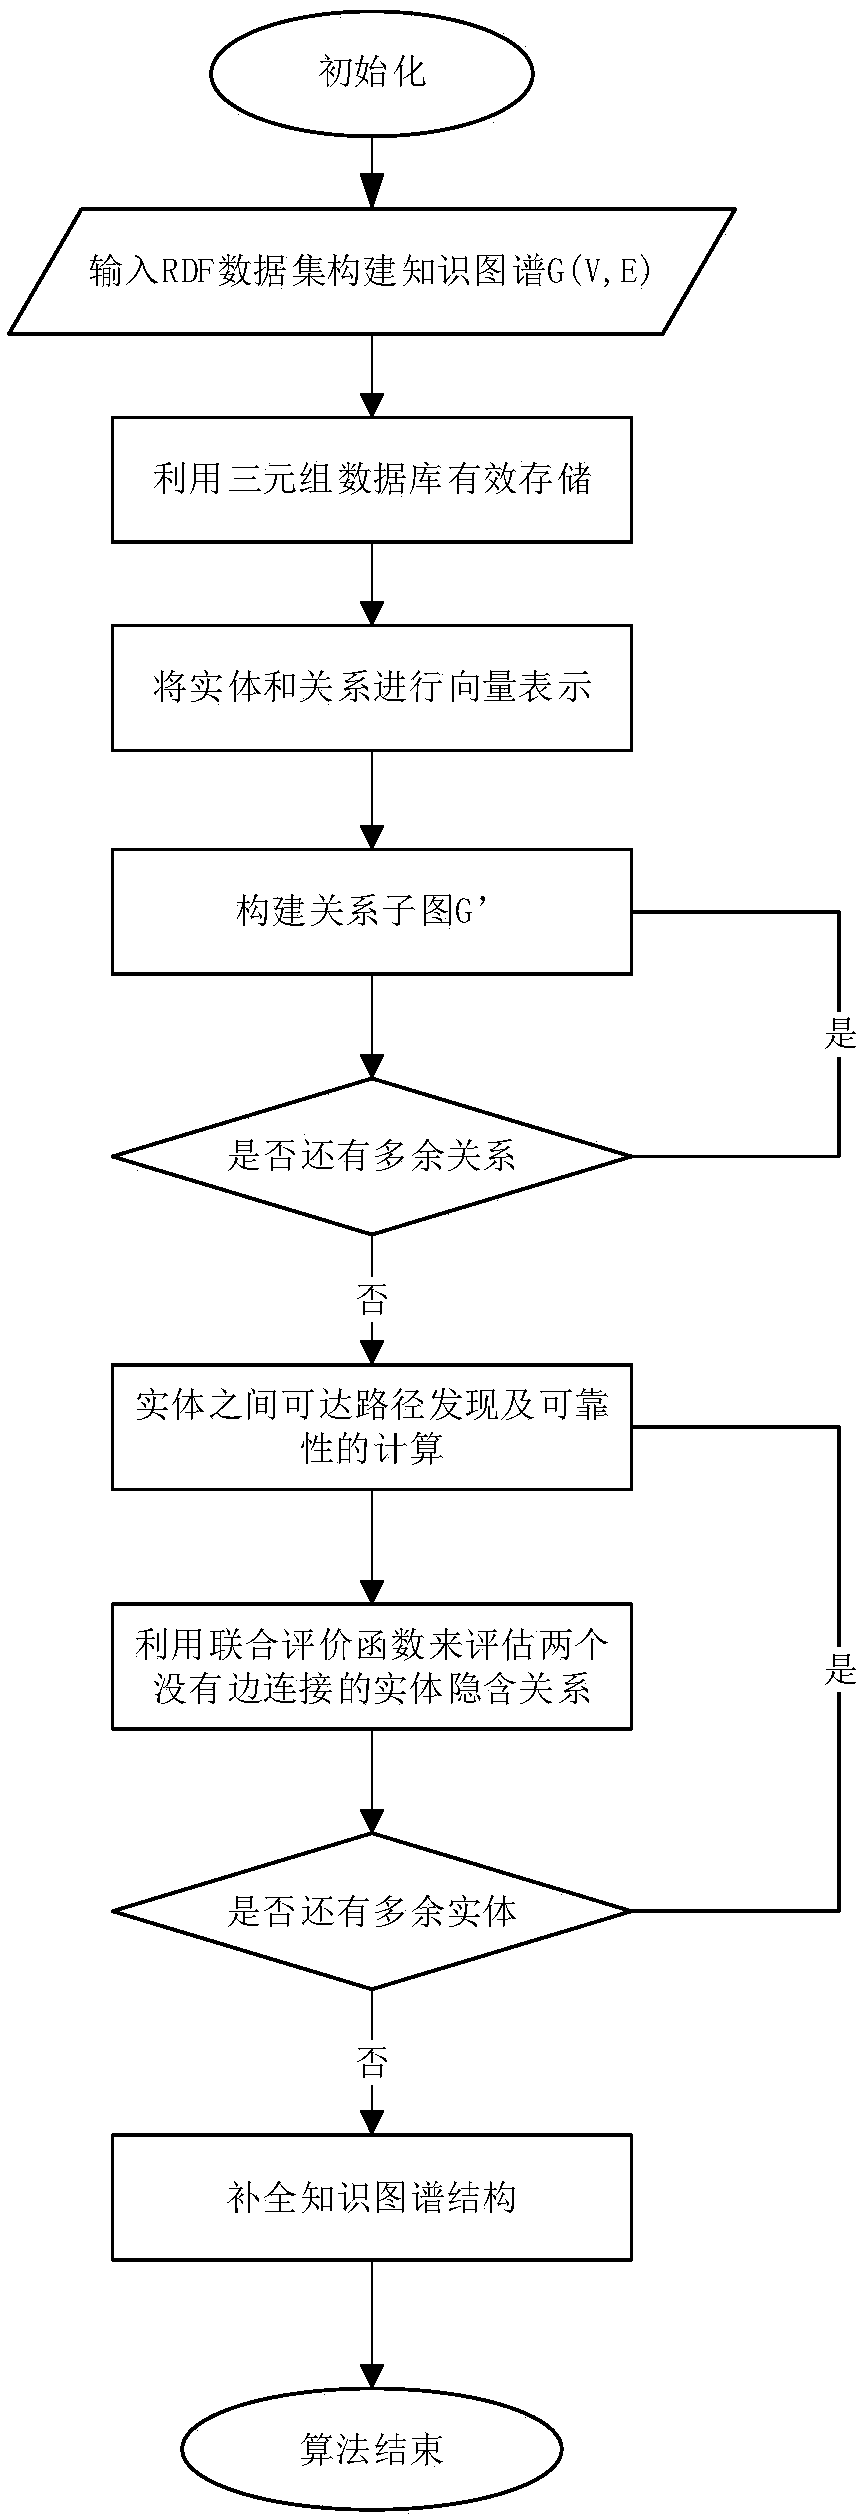 Relationship prediction method based on knowledge map